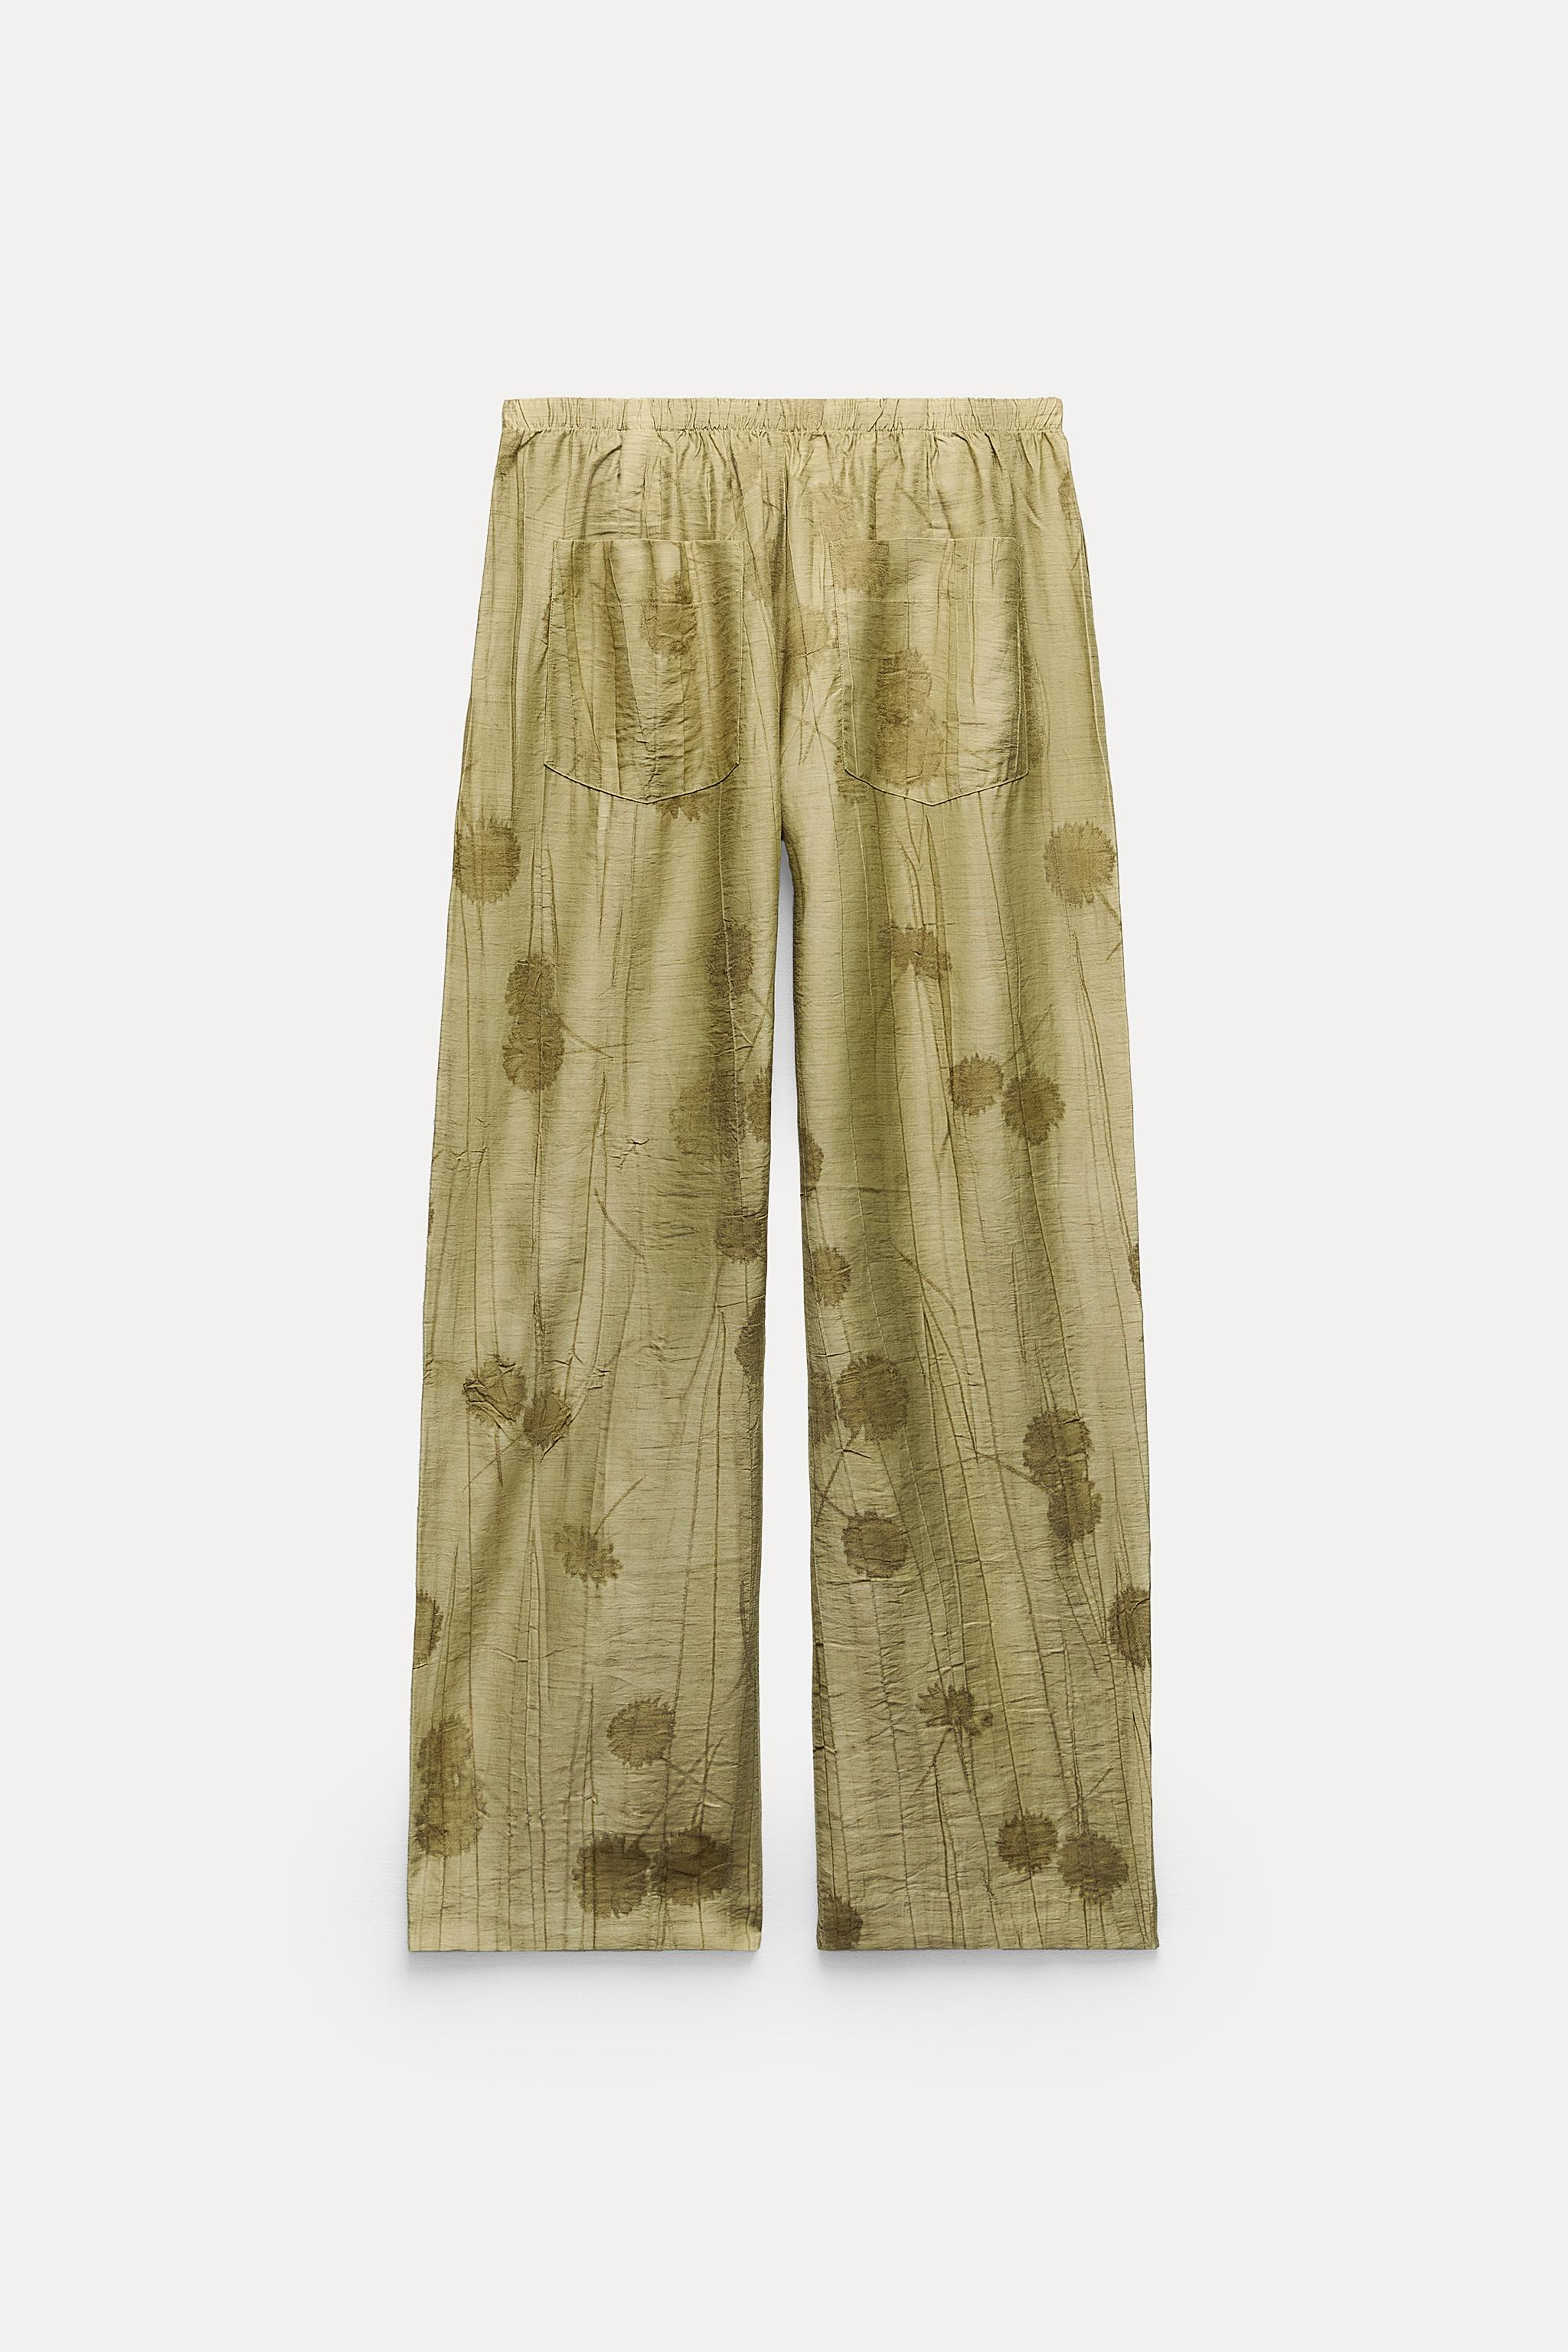 JACQUARD PANTS ZW COLLECTION - Olive green | ZARA Canada